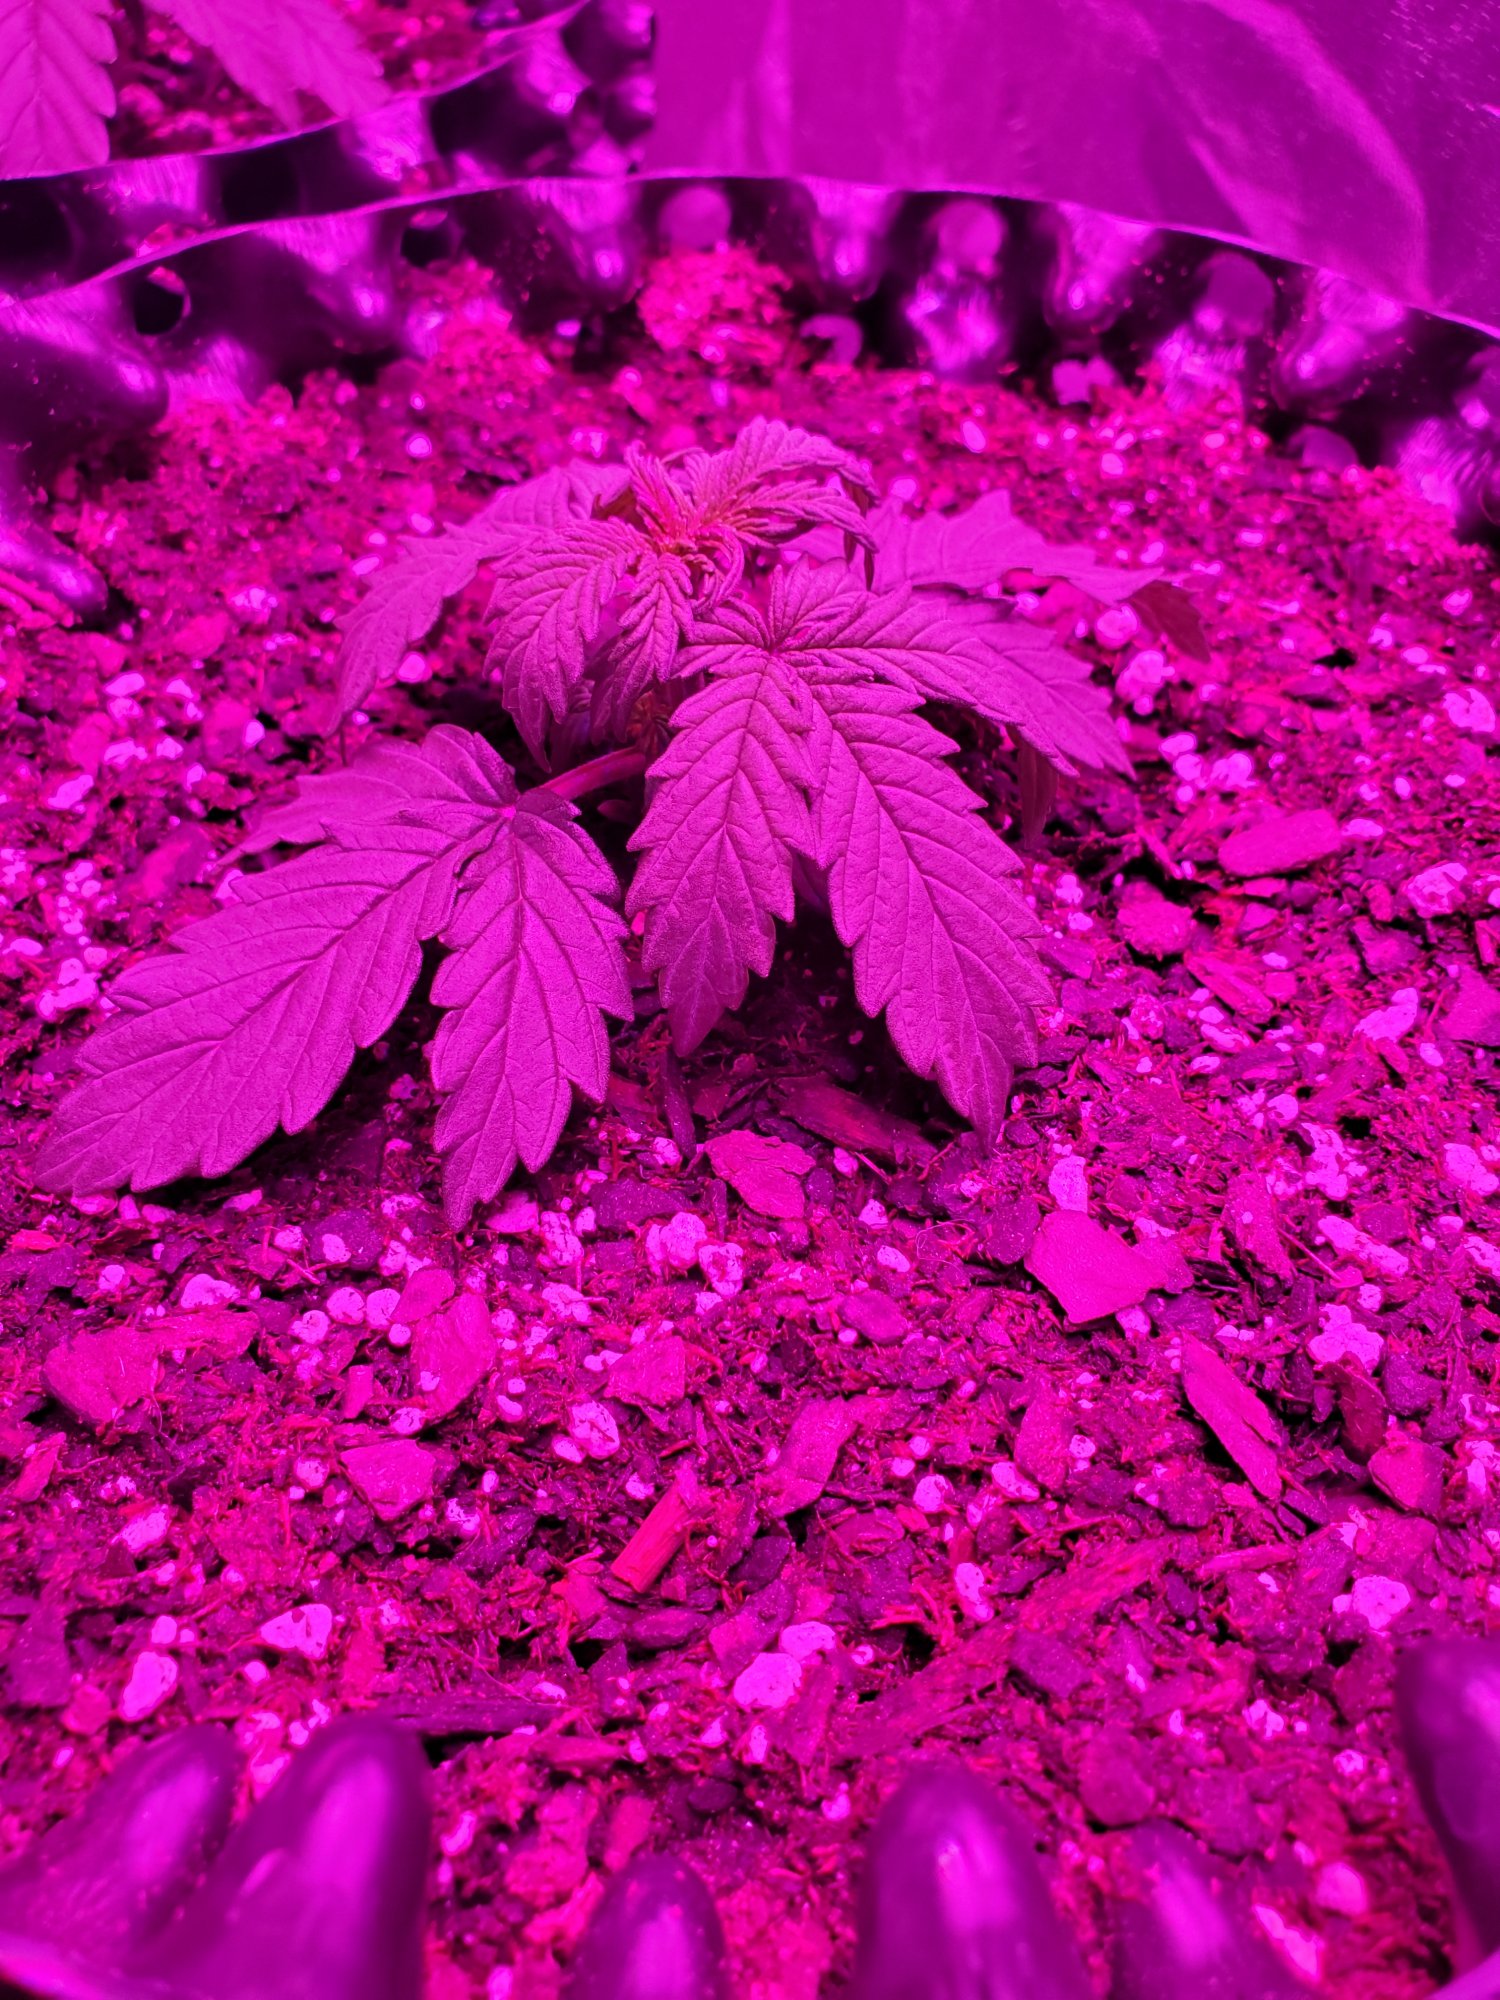 Does this one look sick16 days 2